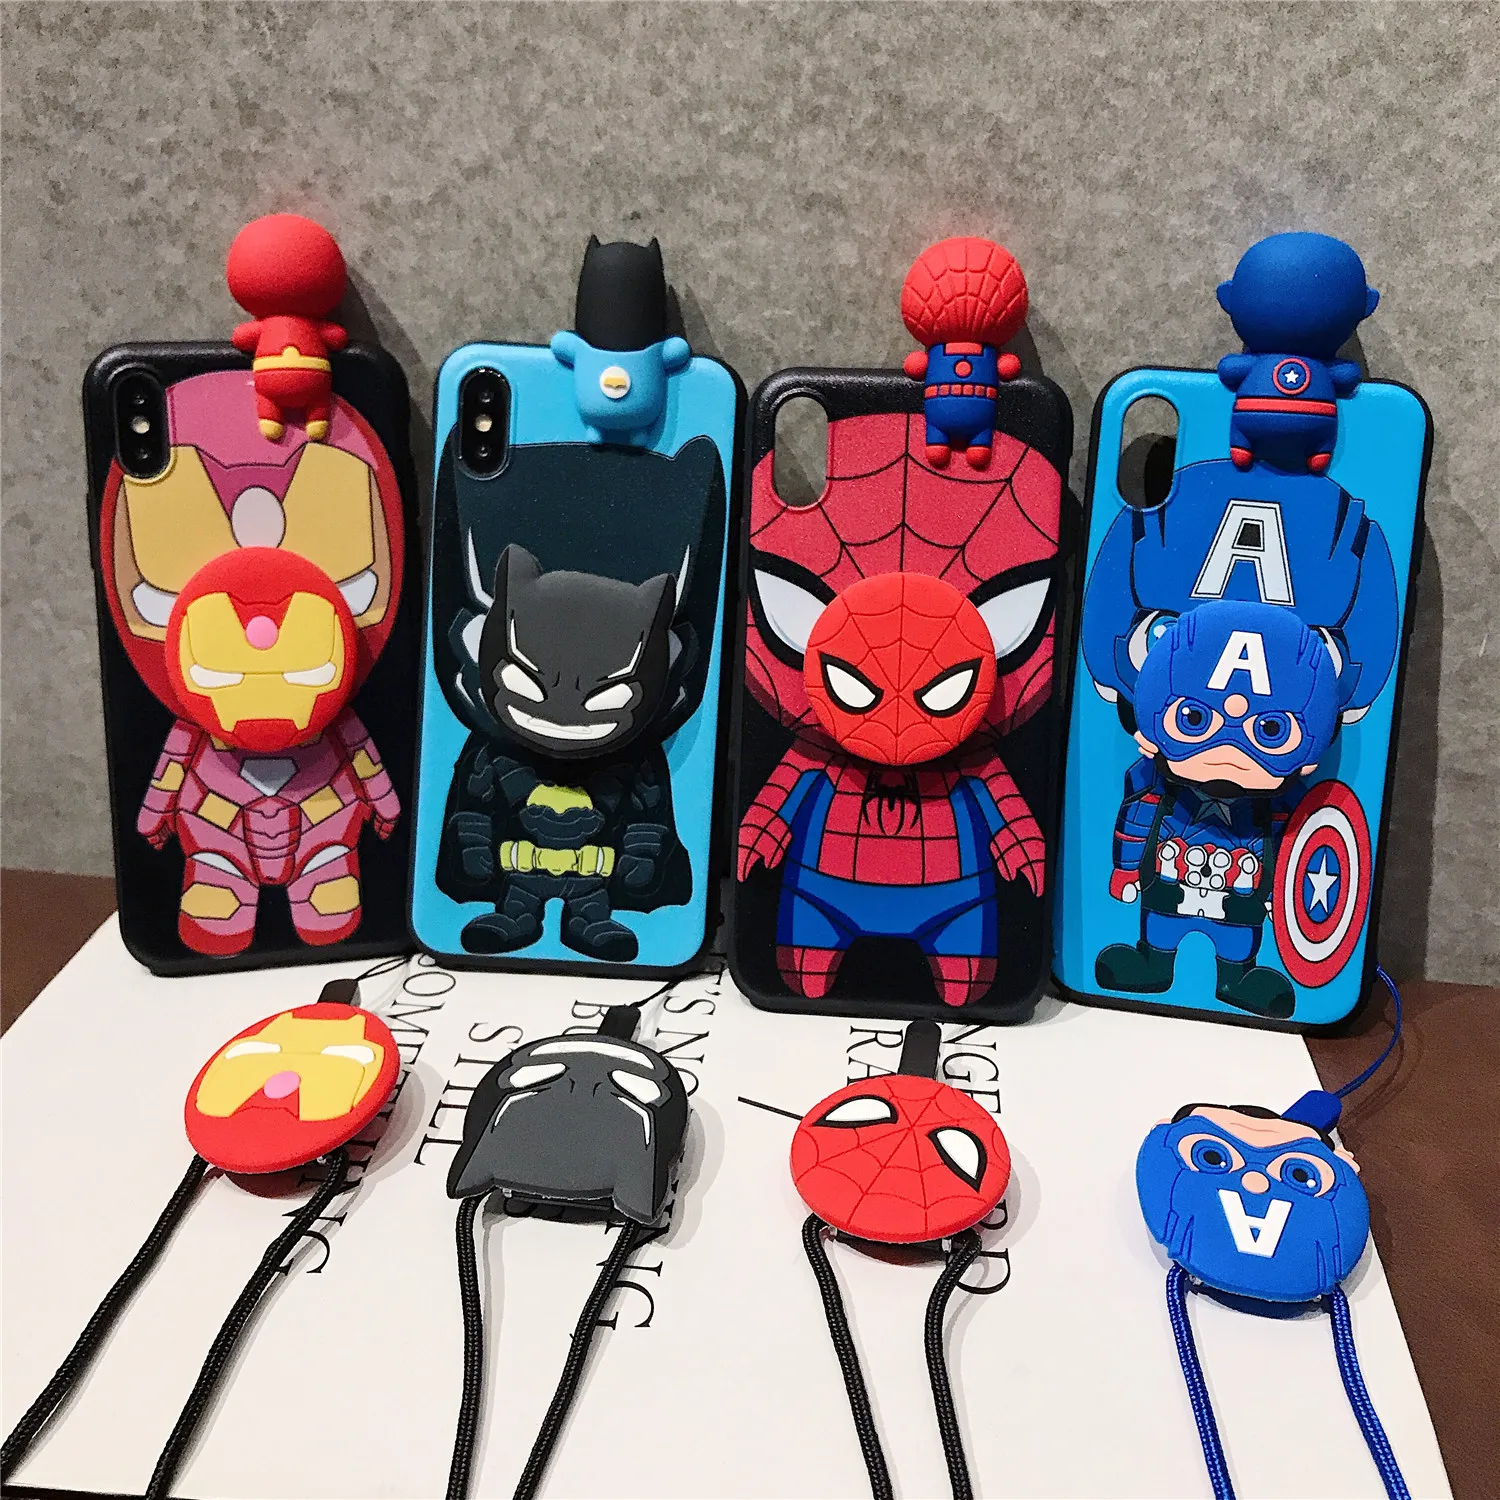 

For Samsung Galaxy A12 A11 A71 A51 A52 A22 A02s A32 A72 A13 A53 A03s A04s A20s A33 A73 A23 Spiderman Case With Holder Strap Rope